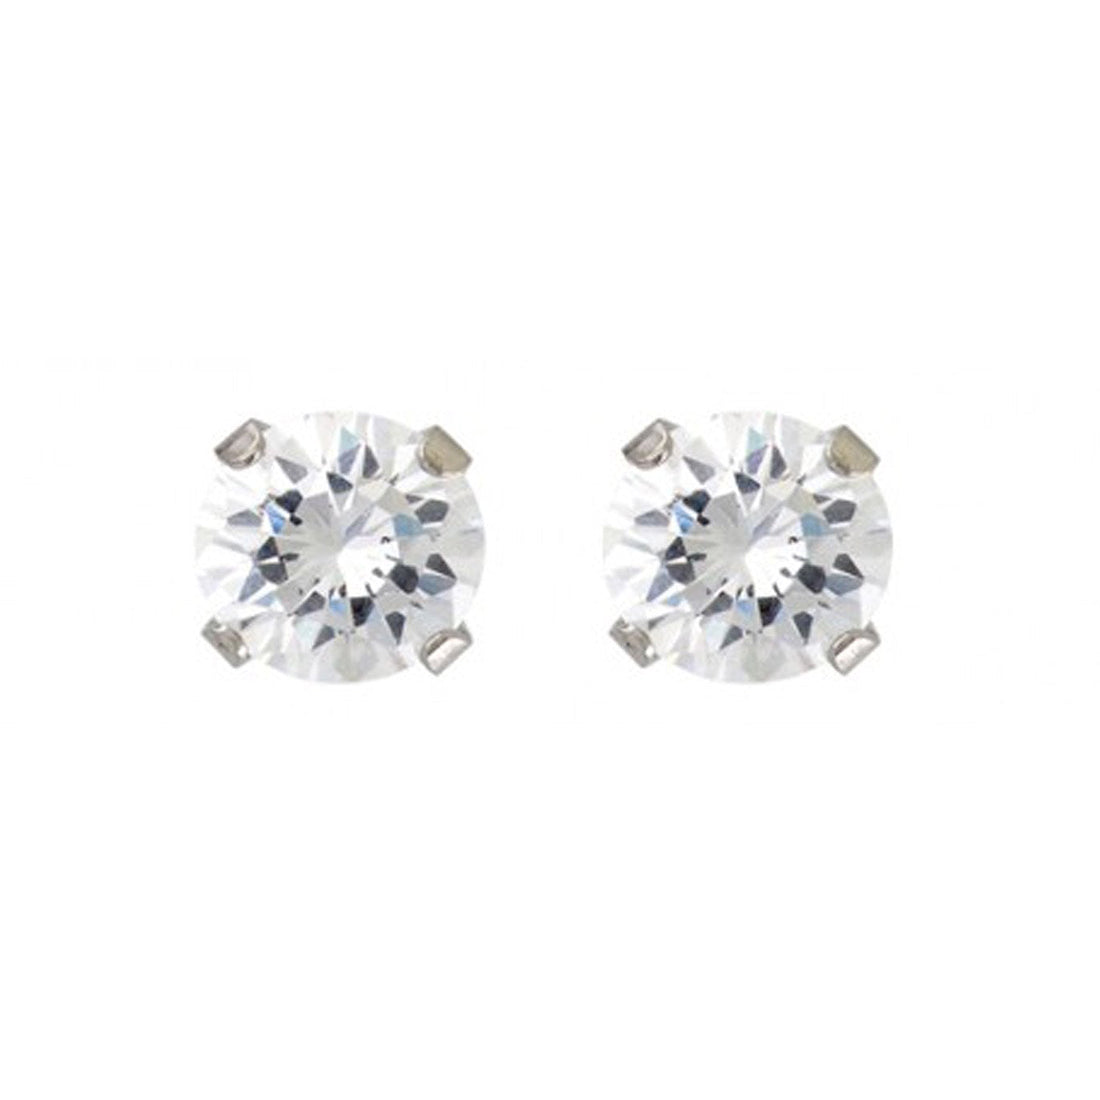 7MM Cubic Zirconia Allergy Free Stainless Steel Ear Studs | Ideal for everyday wear